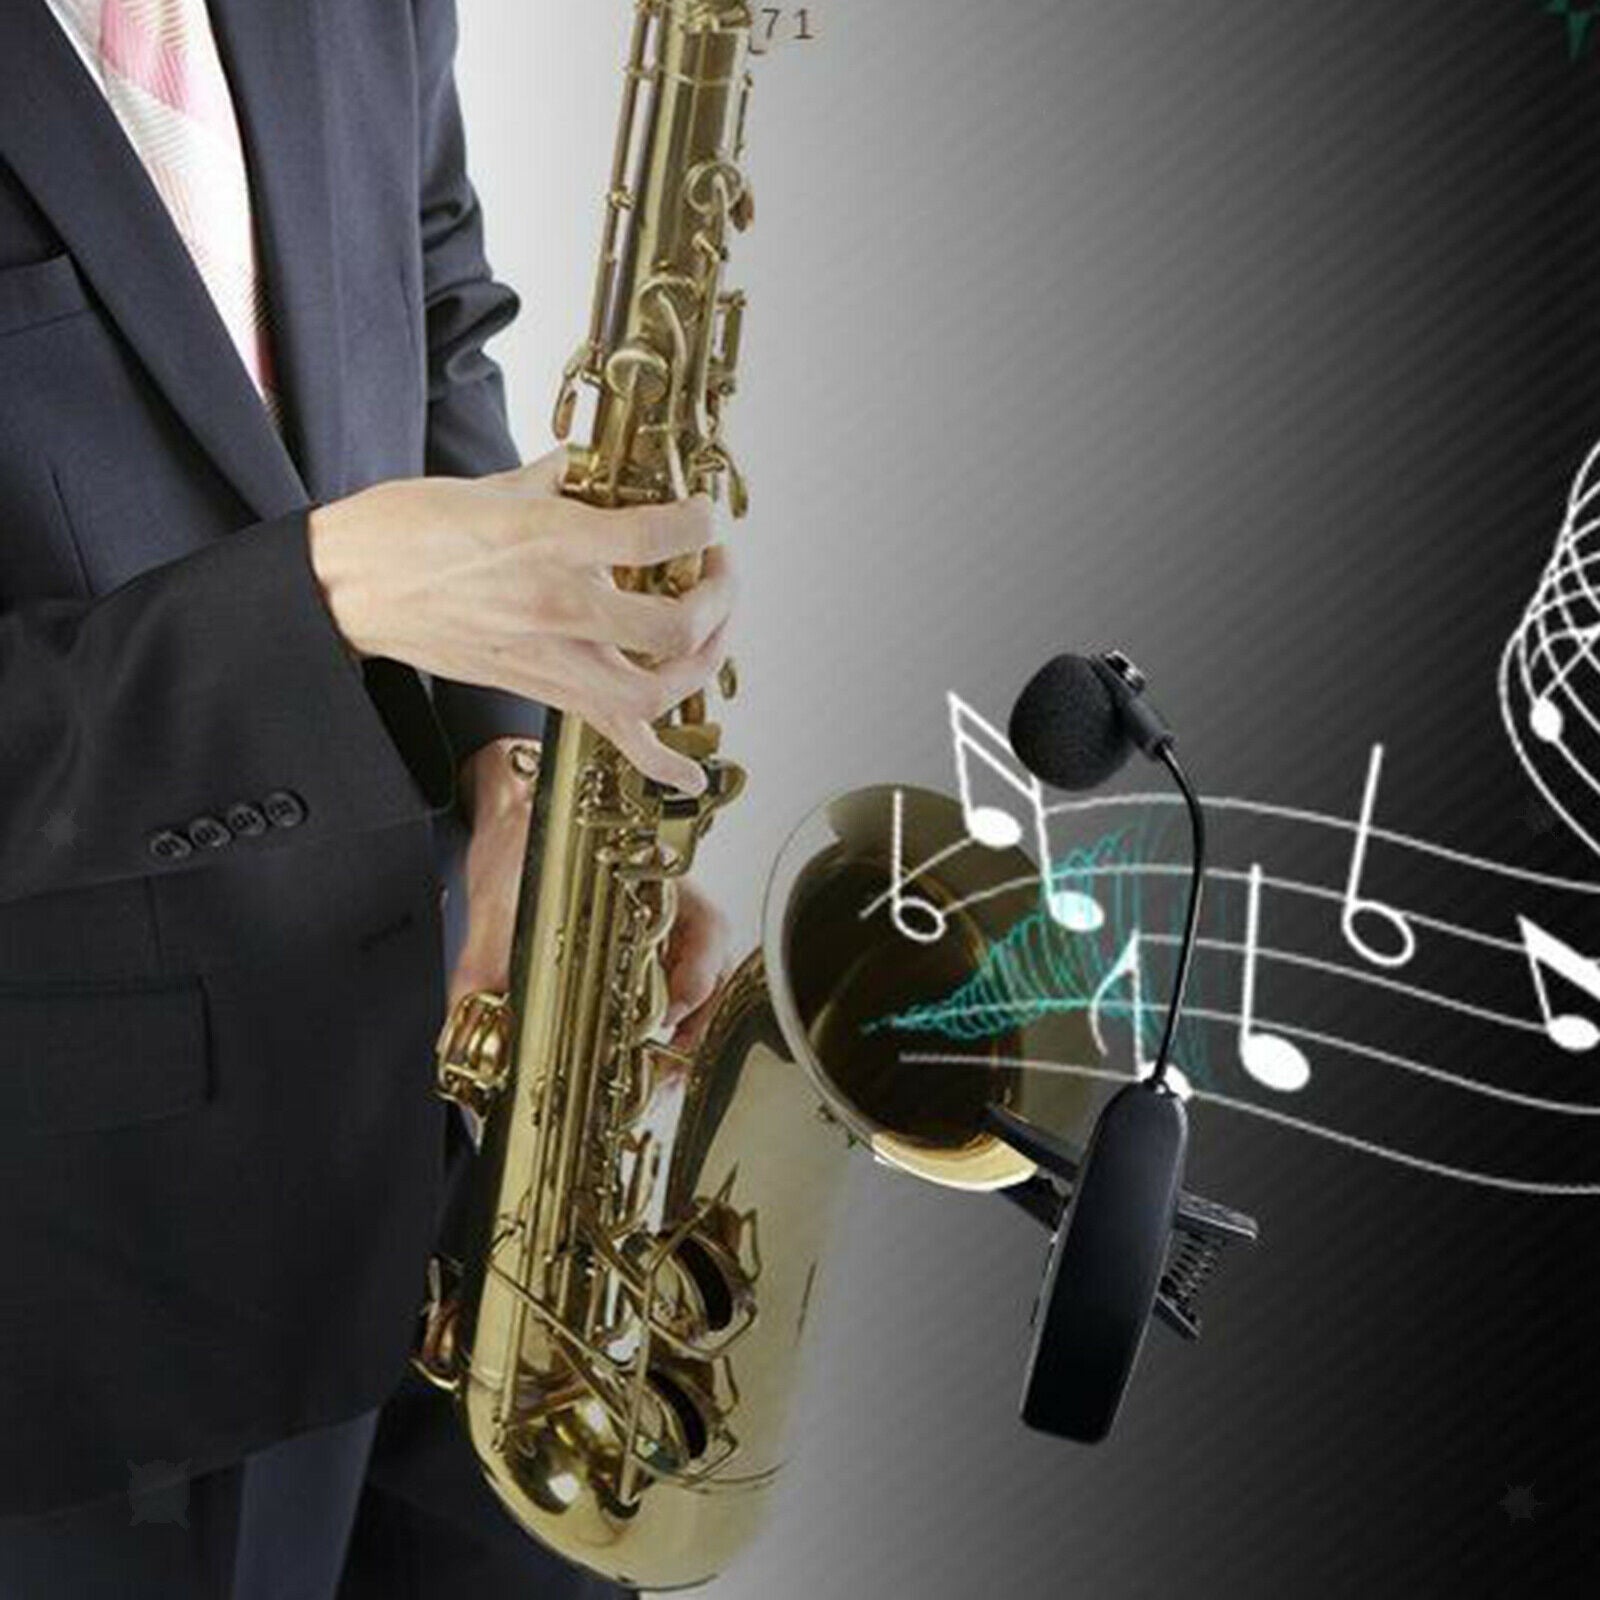 Uhf wireless instruments microphone saxophone microphone wireless receiver and